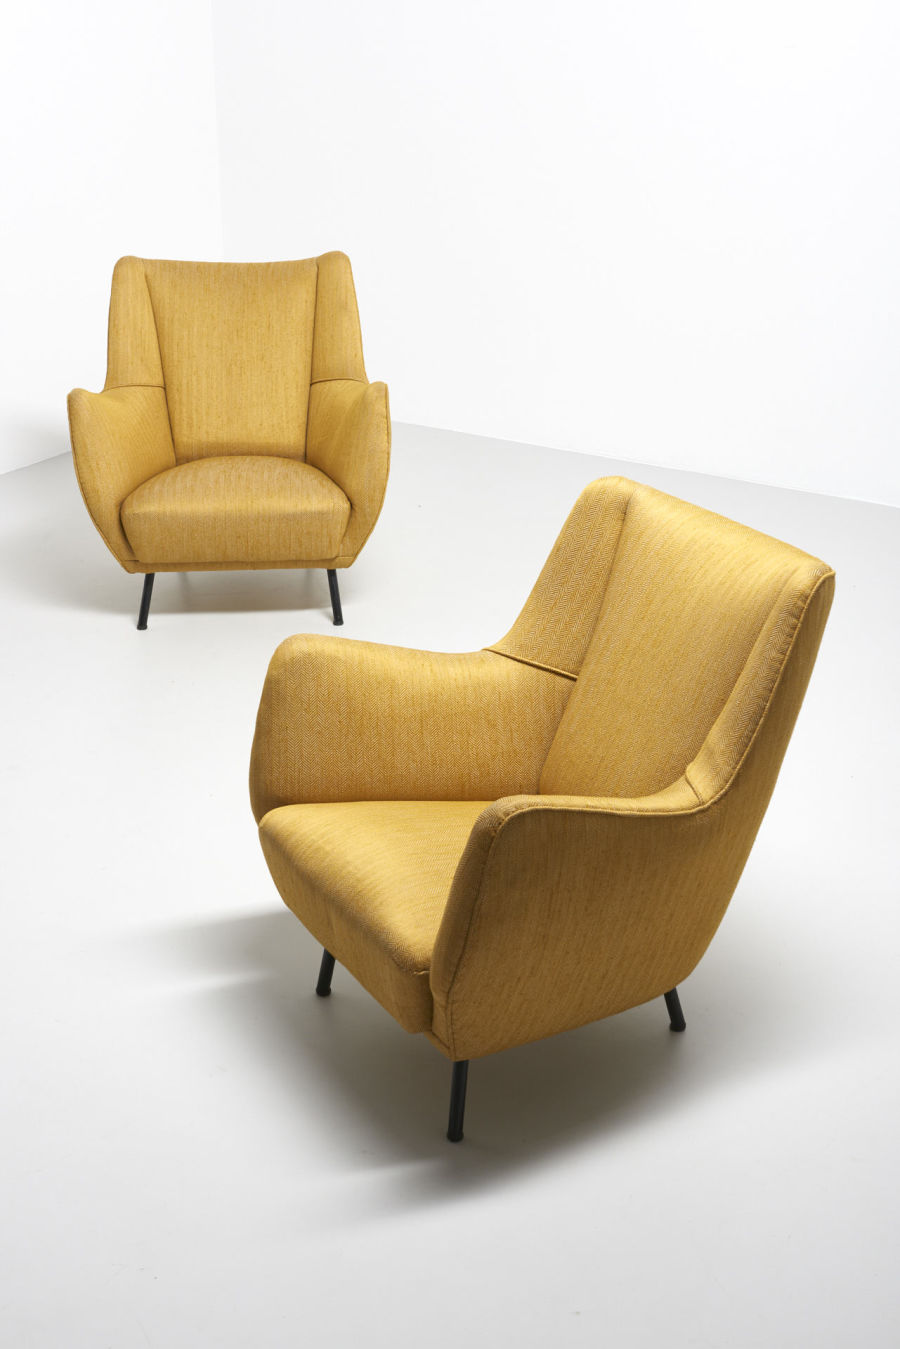 modestfurniture-vintage-2060-pair-easy-chairs-italy-195010